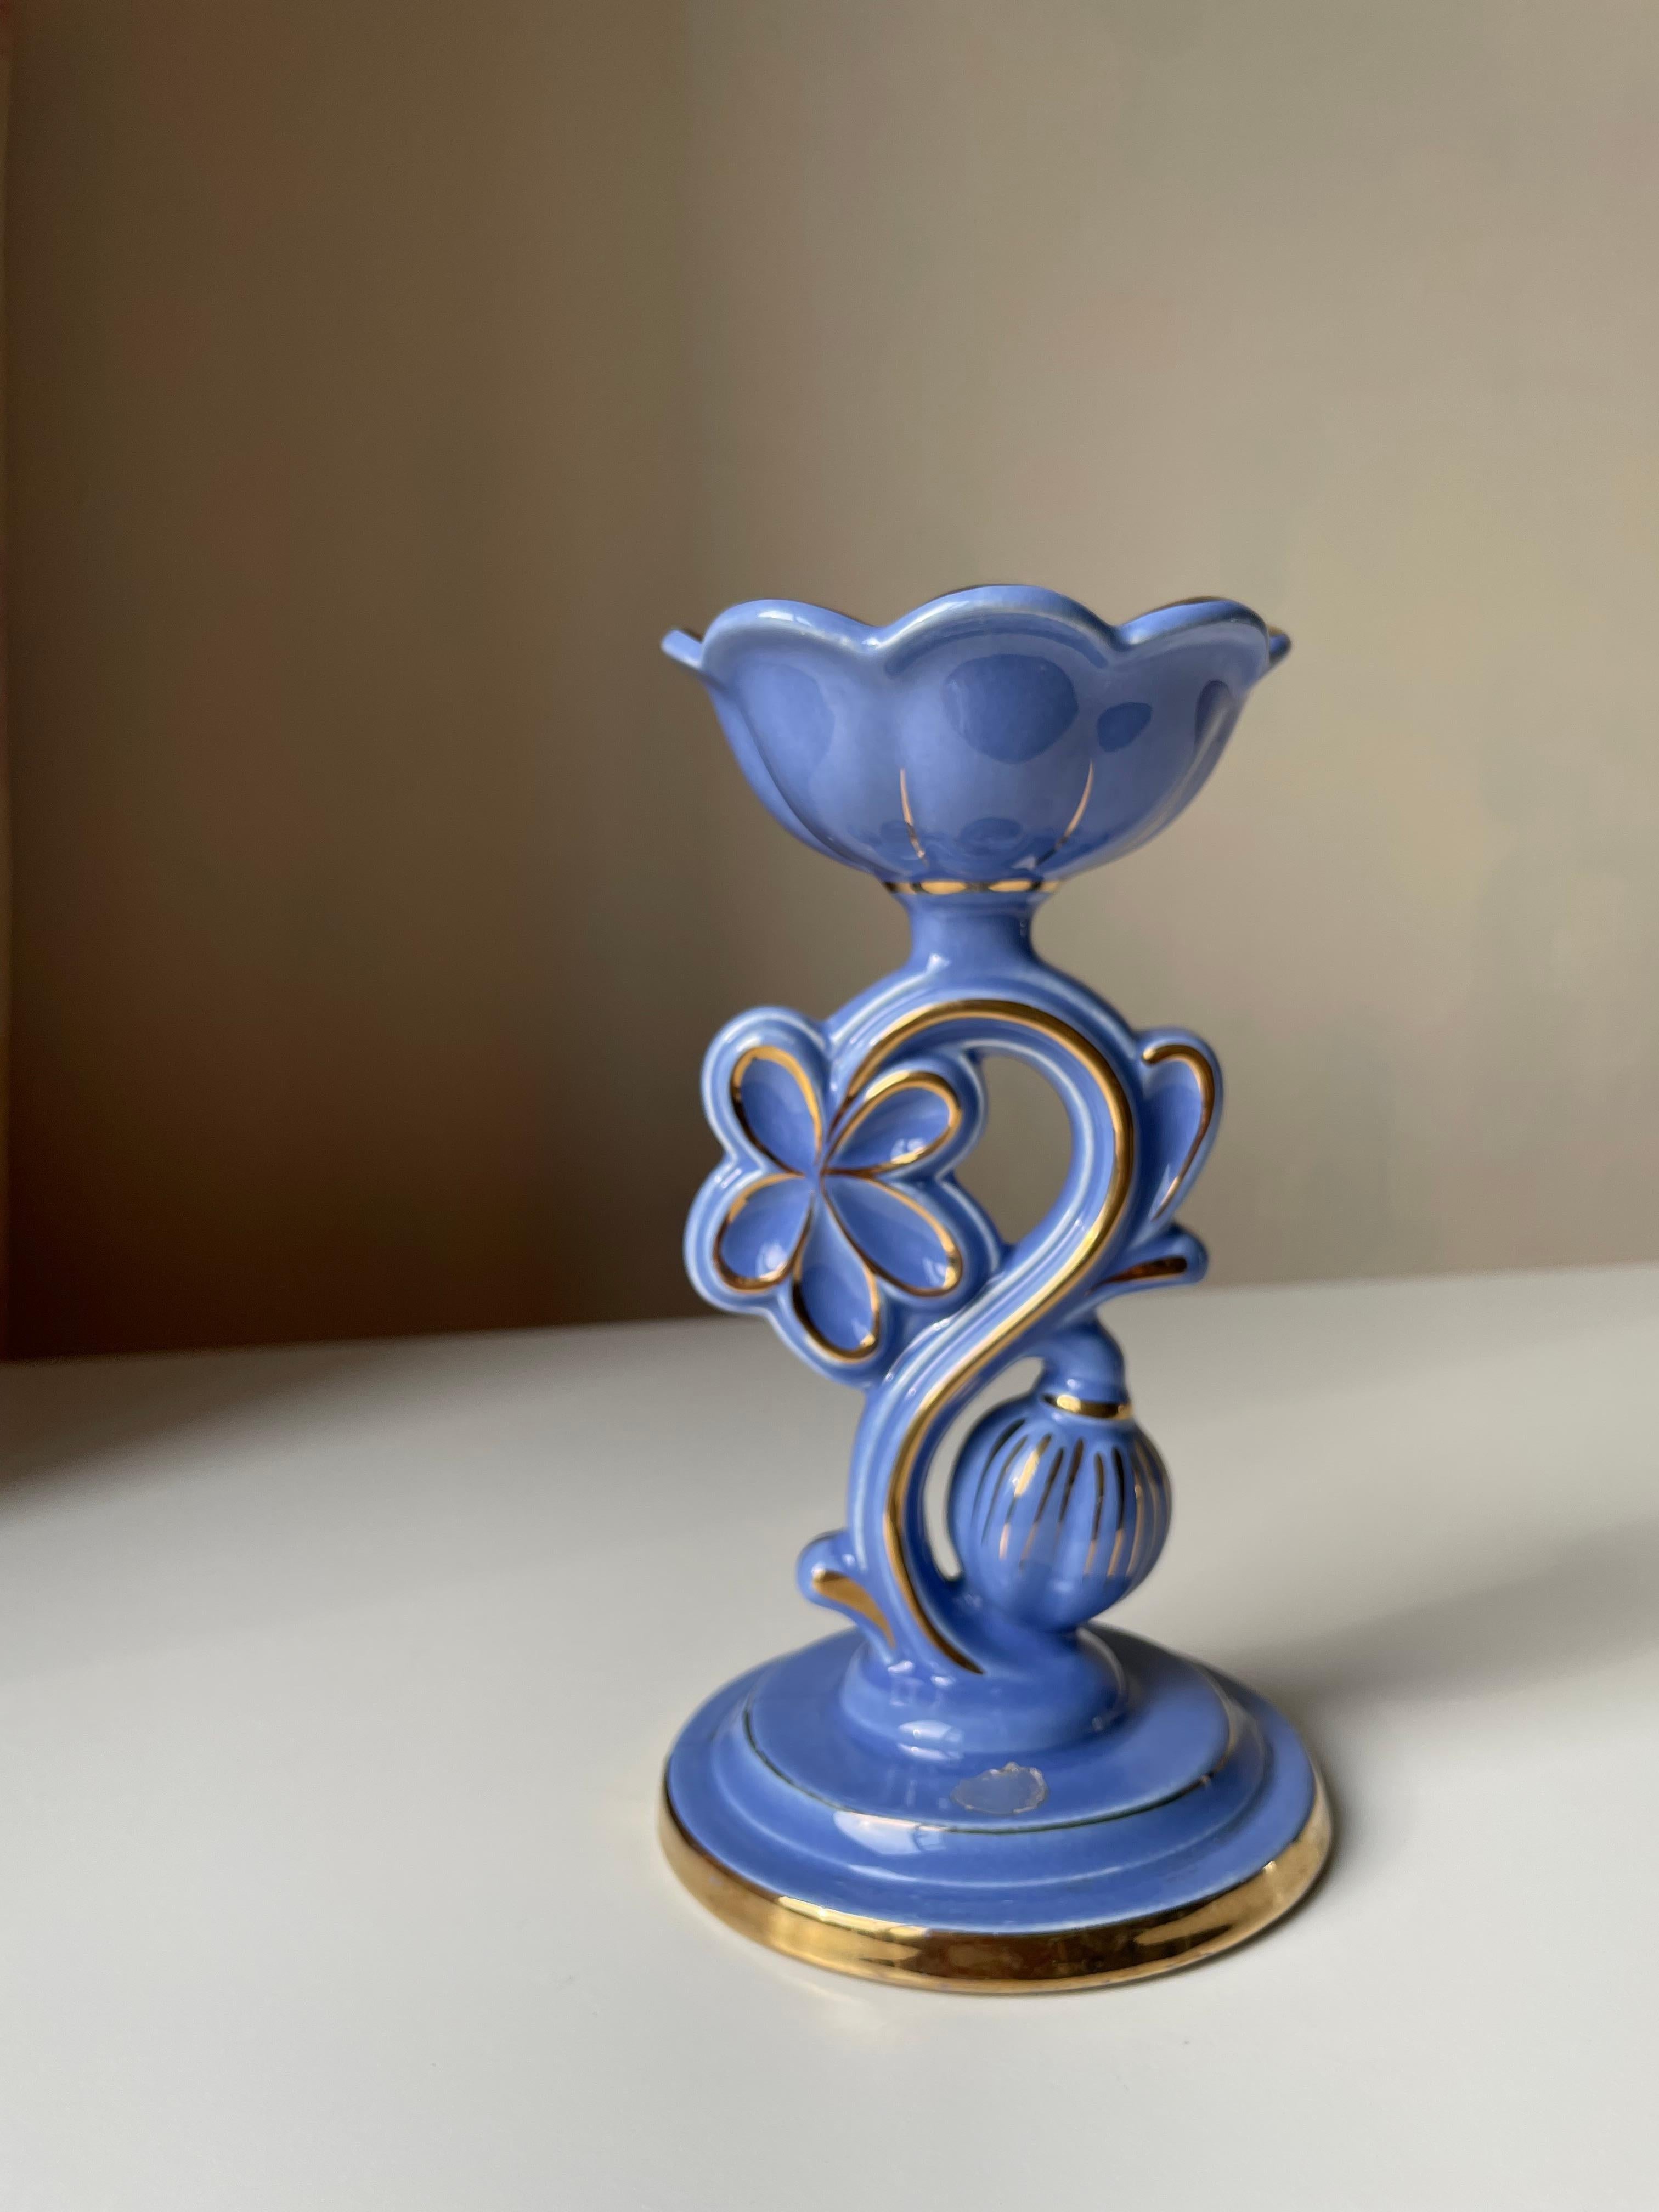 Romantic art nouveau style blue porcelain candlestick with a slight lilac tint, golden accents and decorative lines. Sculptural floral decor with top part resembling an open flower in which the candle is placed. Original silver colored label